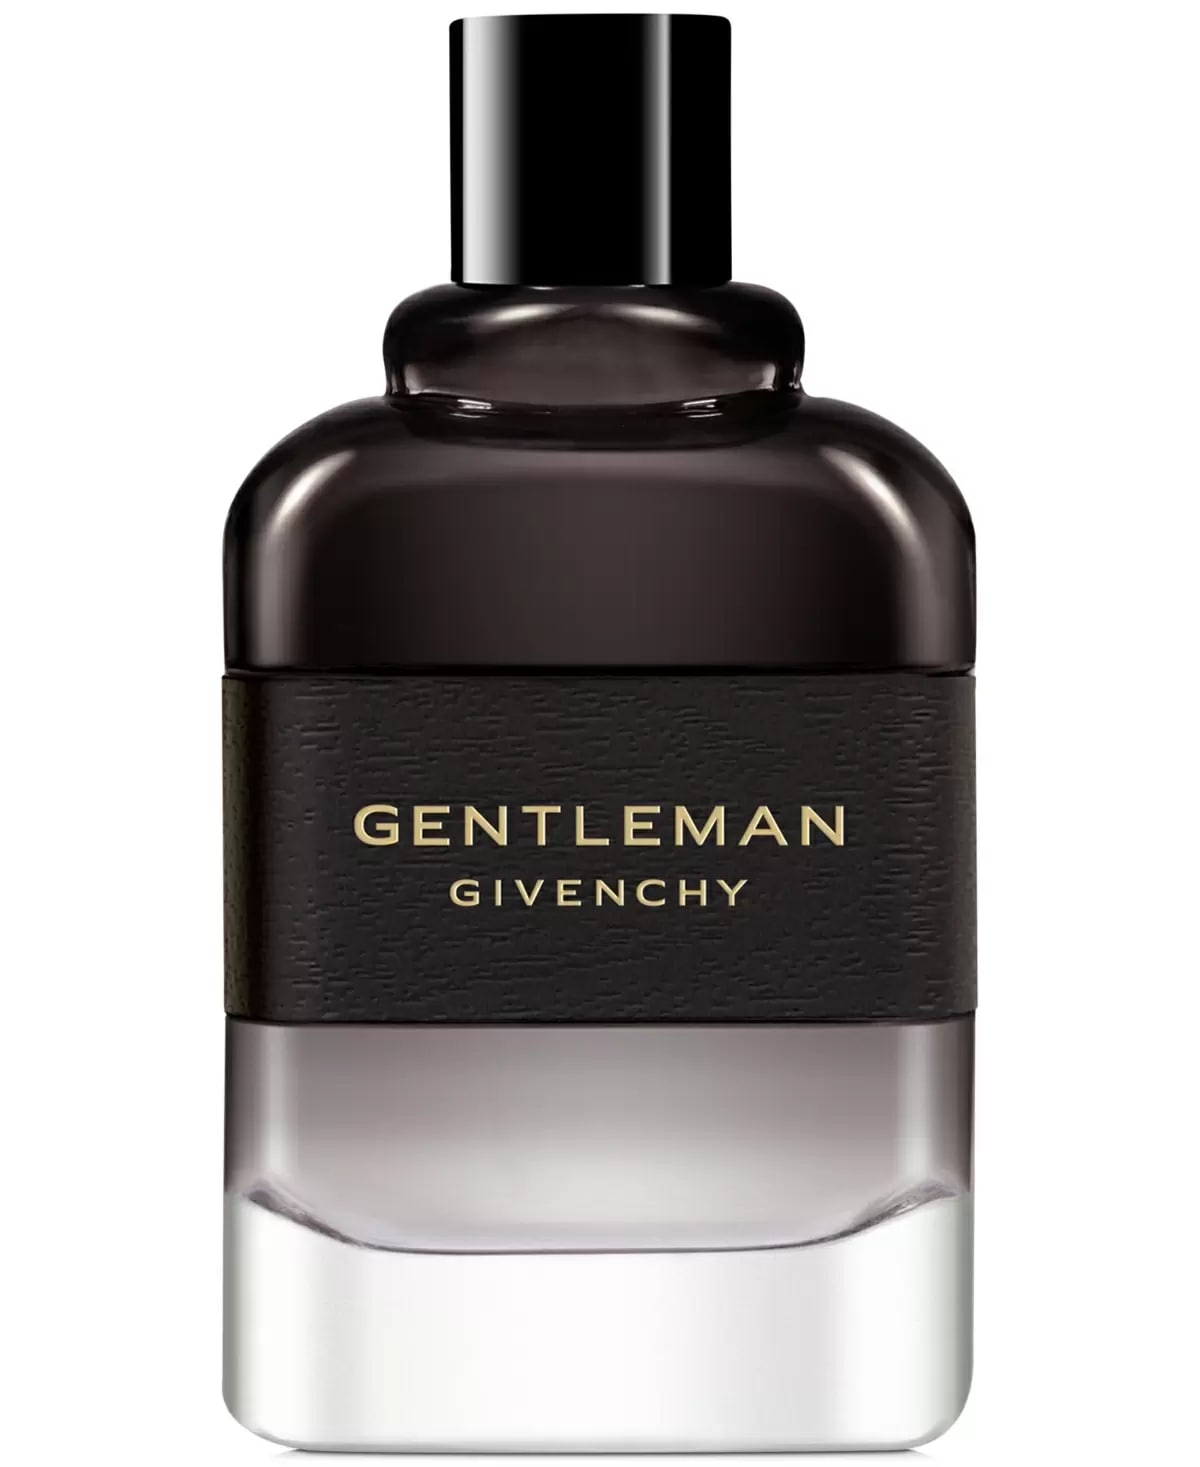 Gentleman Boisee EDP Spray Perfume for Men by Givenchy